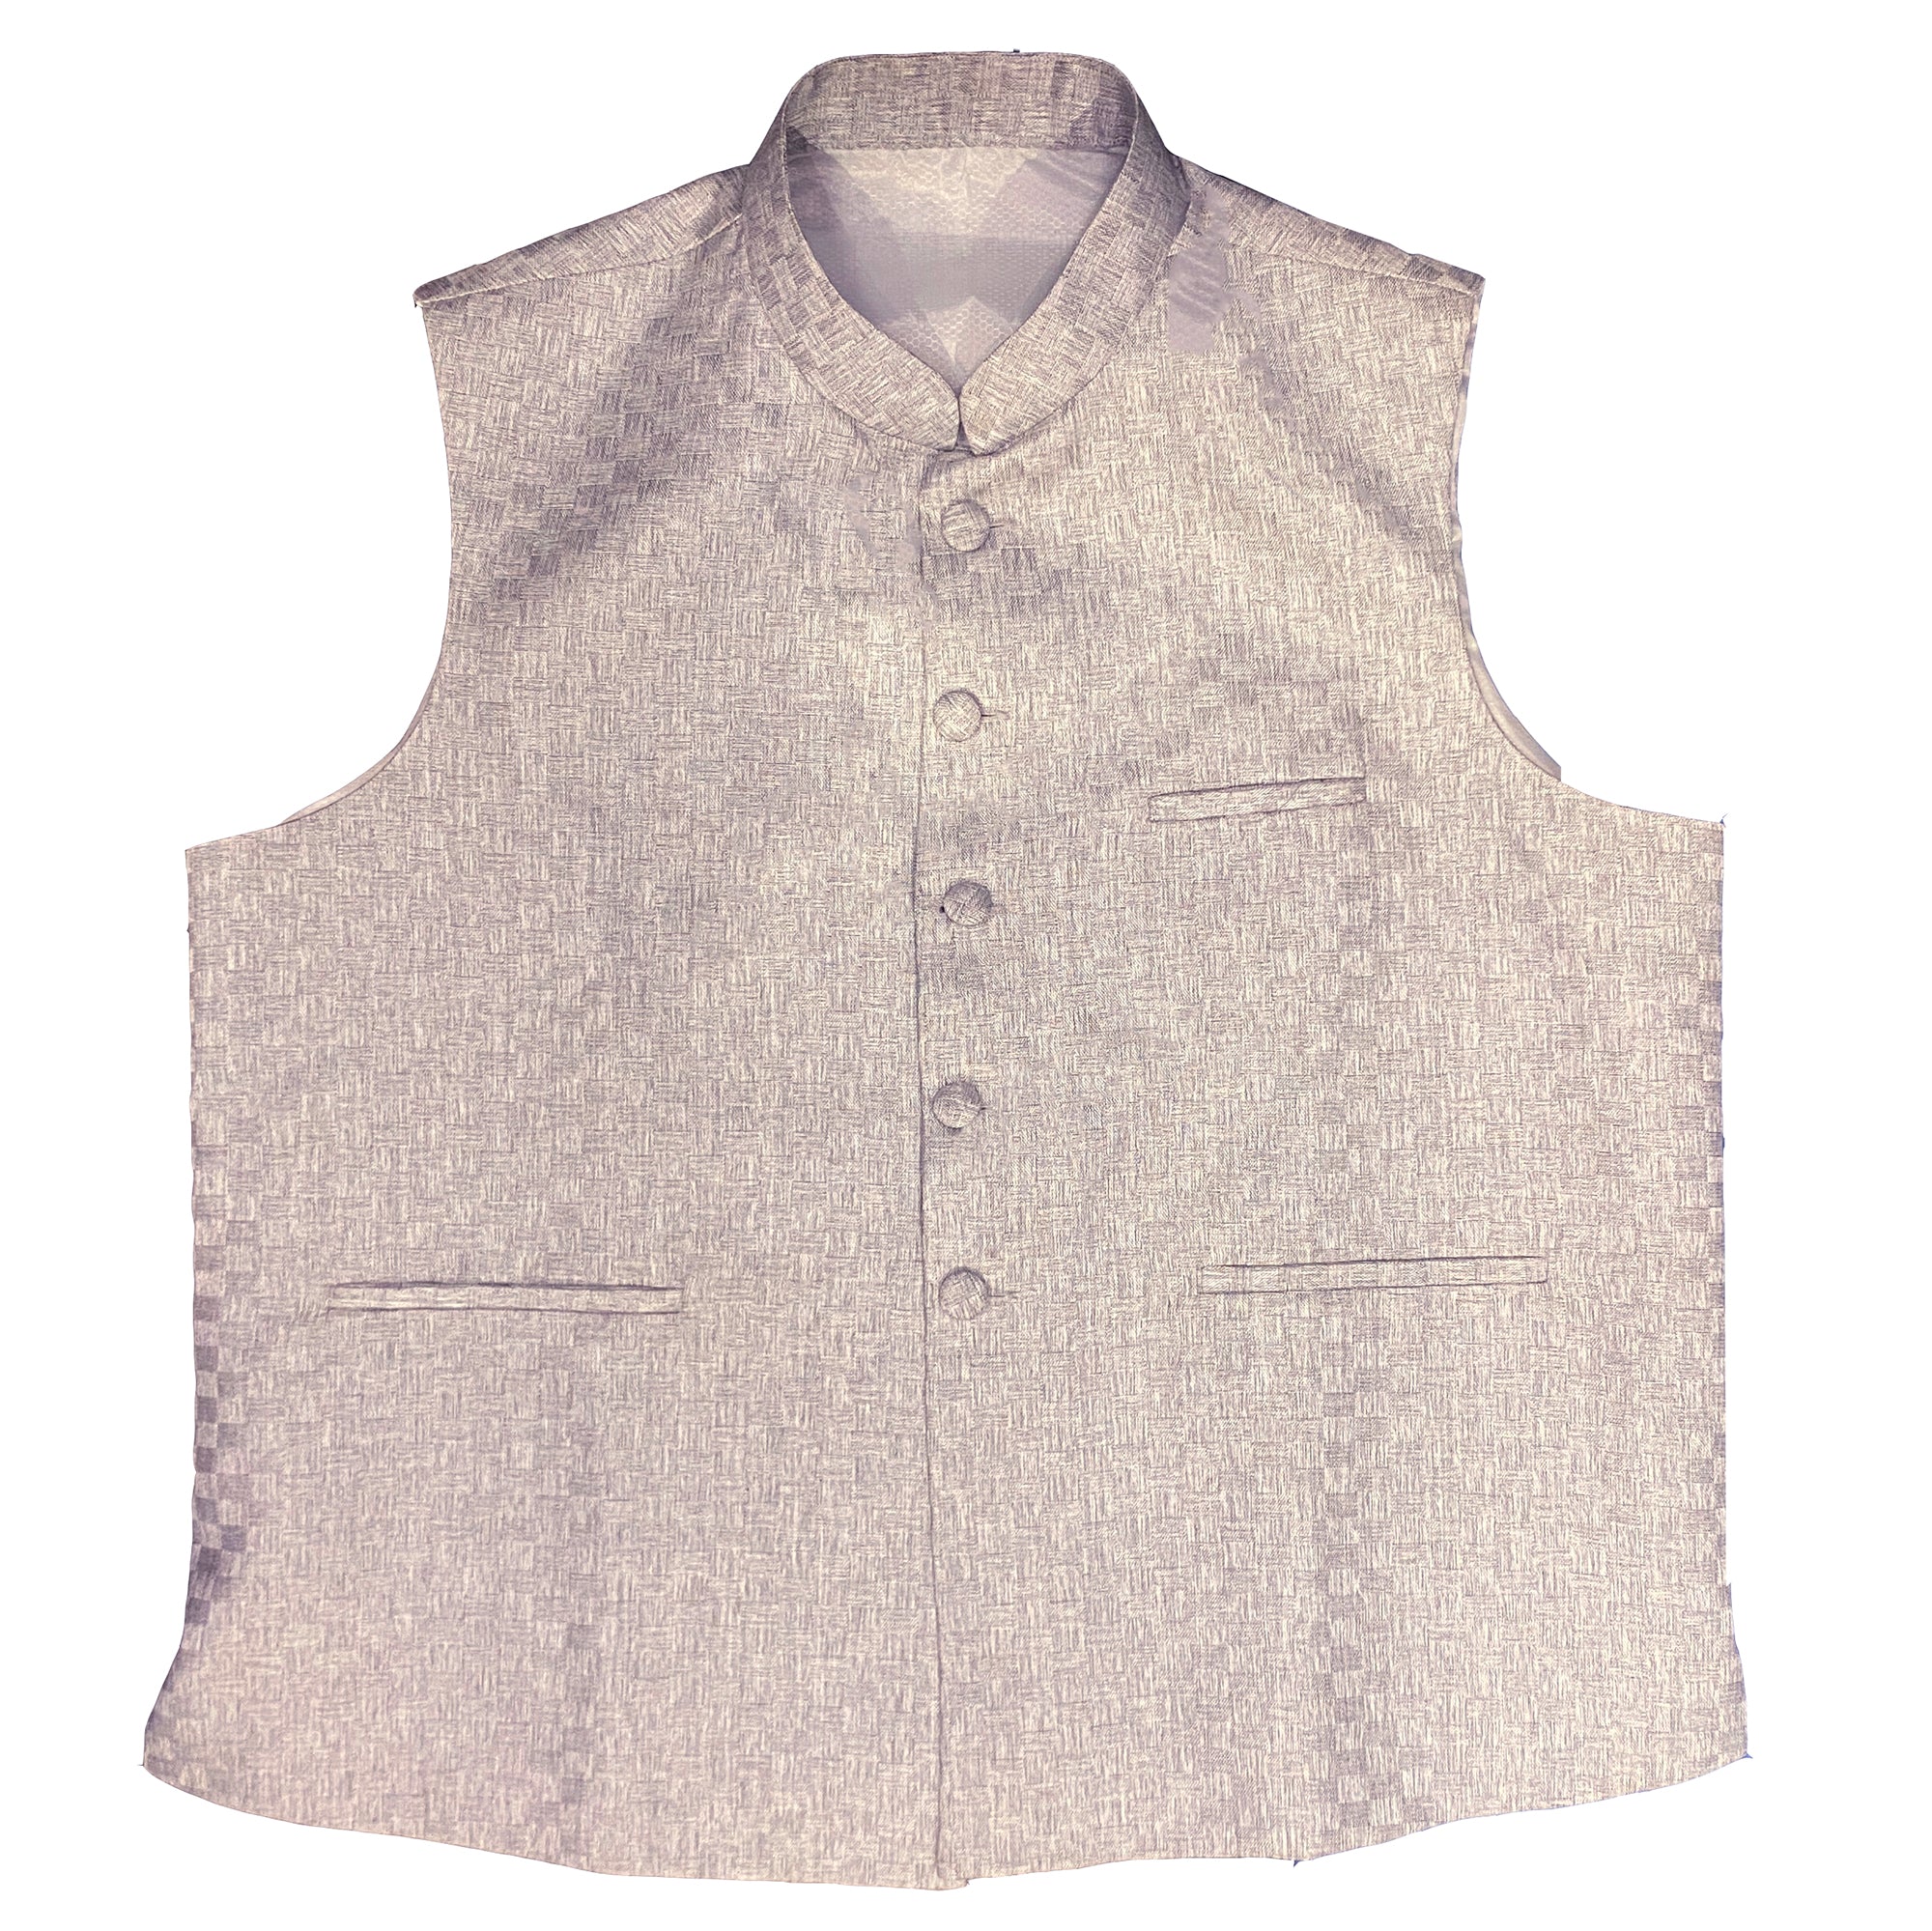 BN Silver Vest-Big & Tall - Vintage India NYC